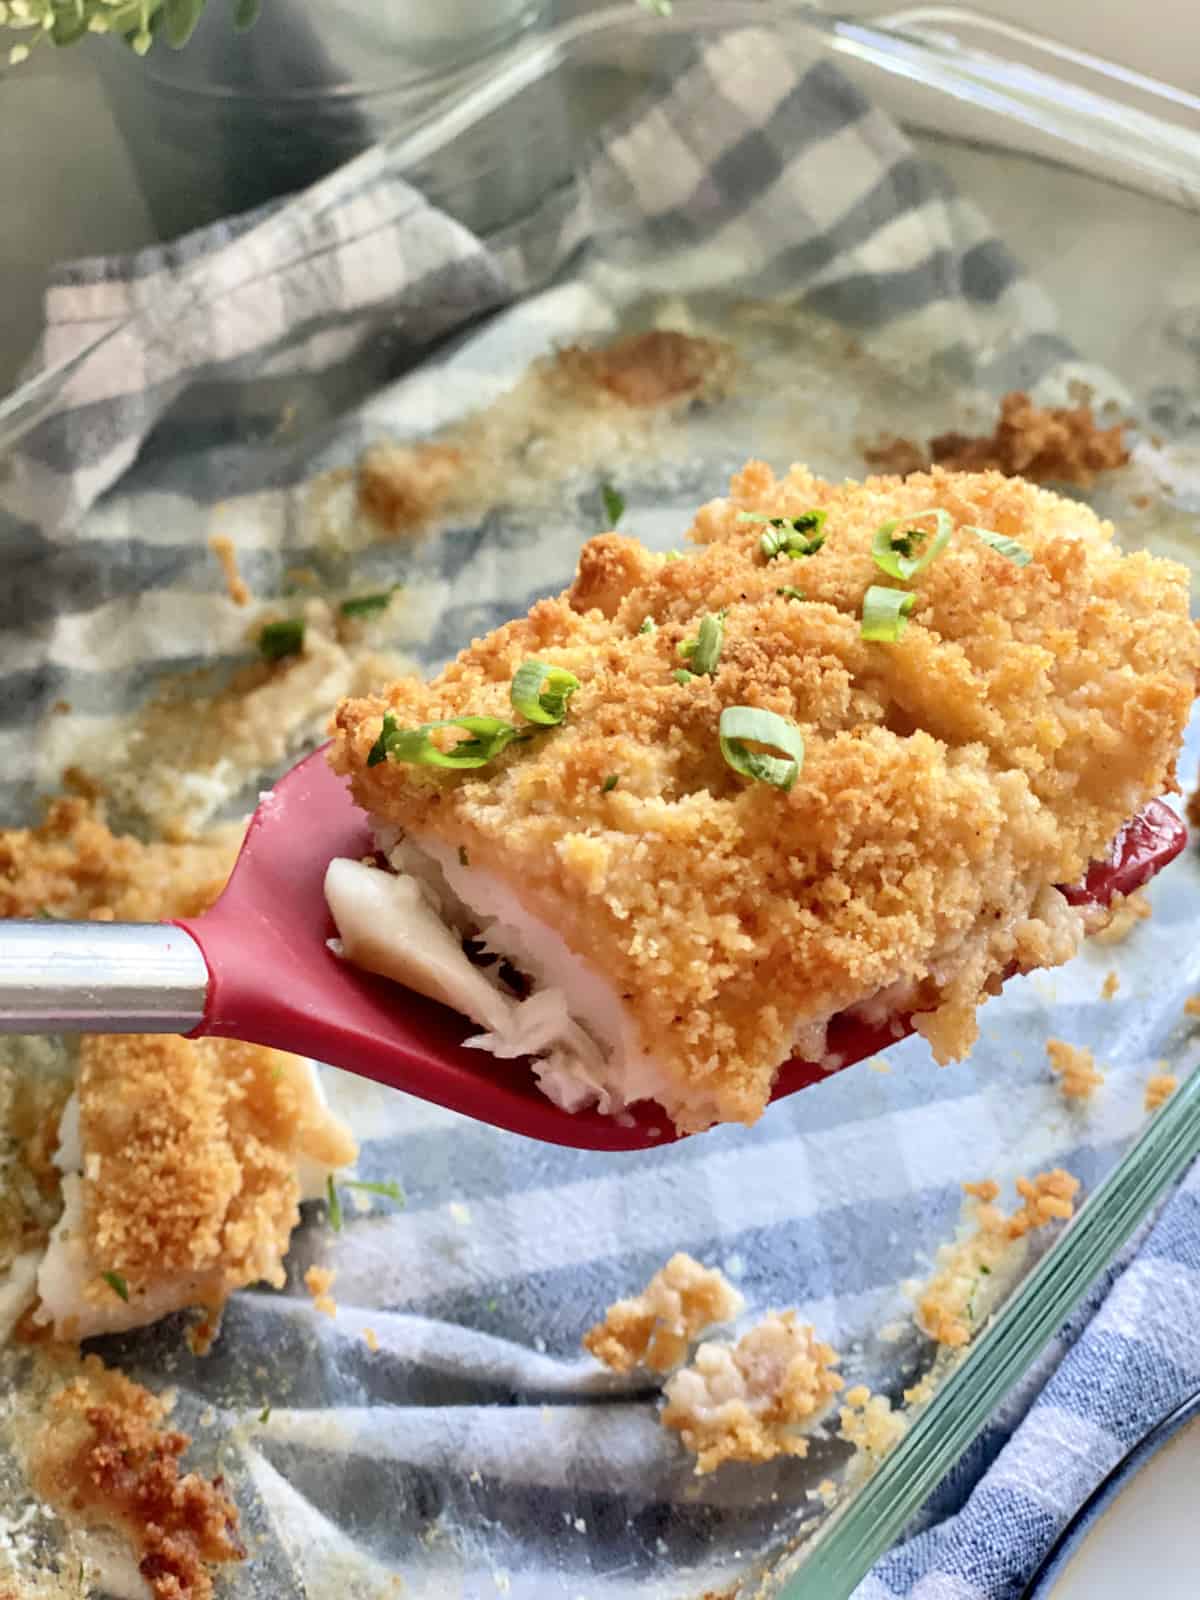 Red spatula with a piece of breaded fish on top.